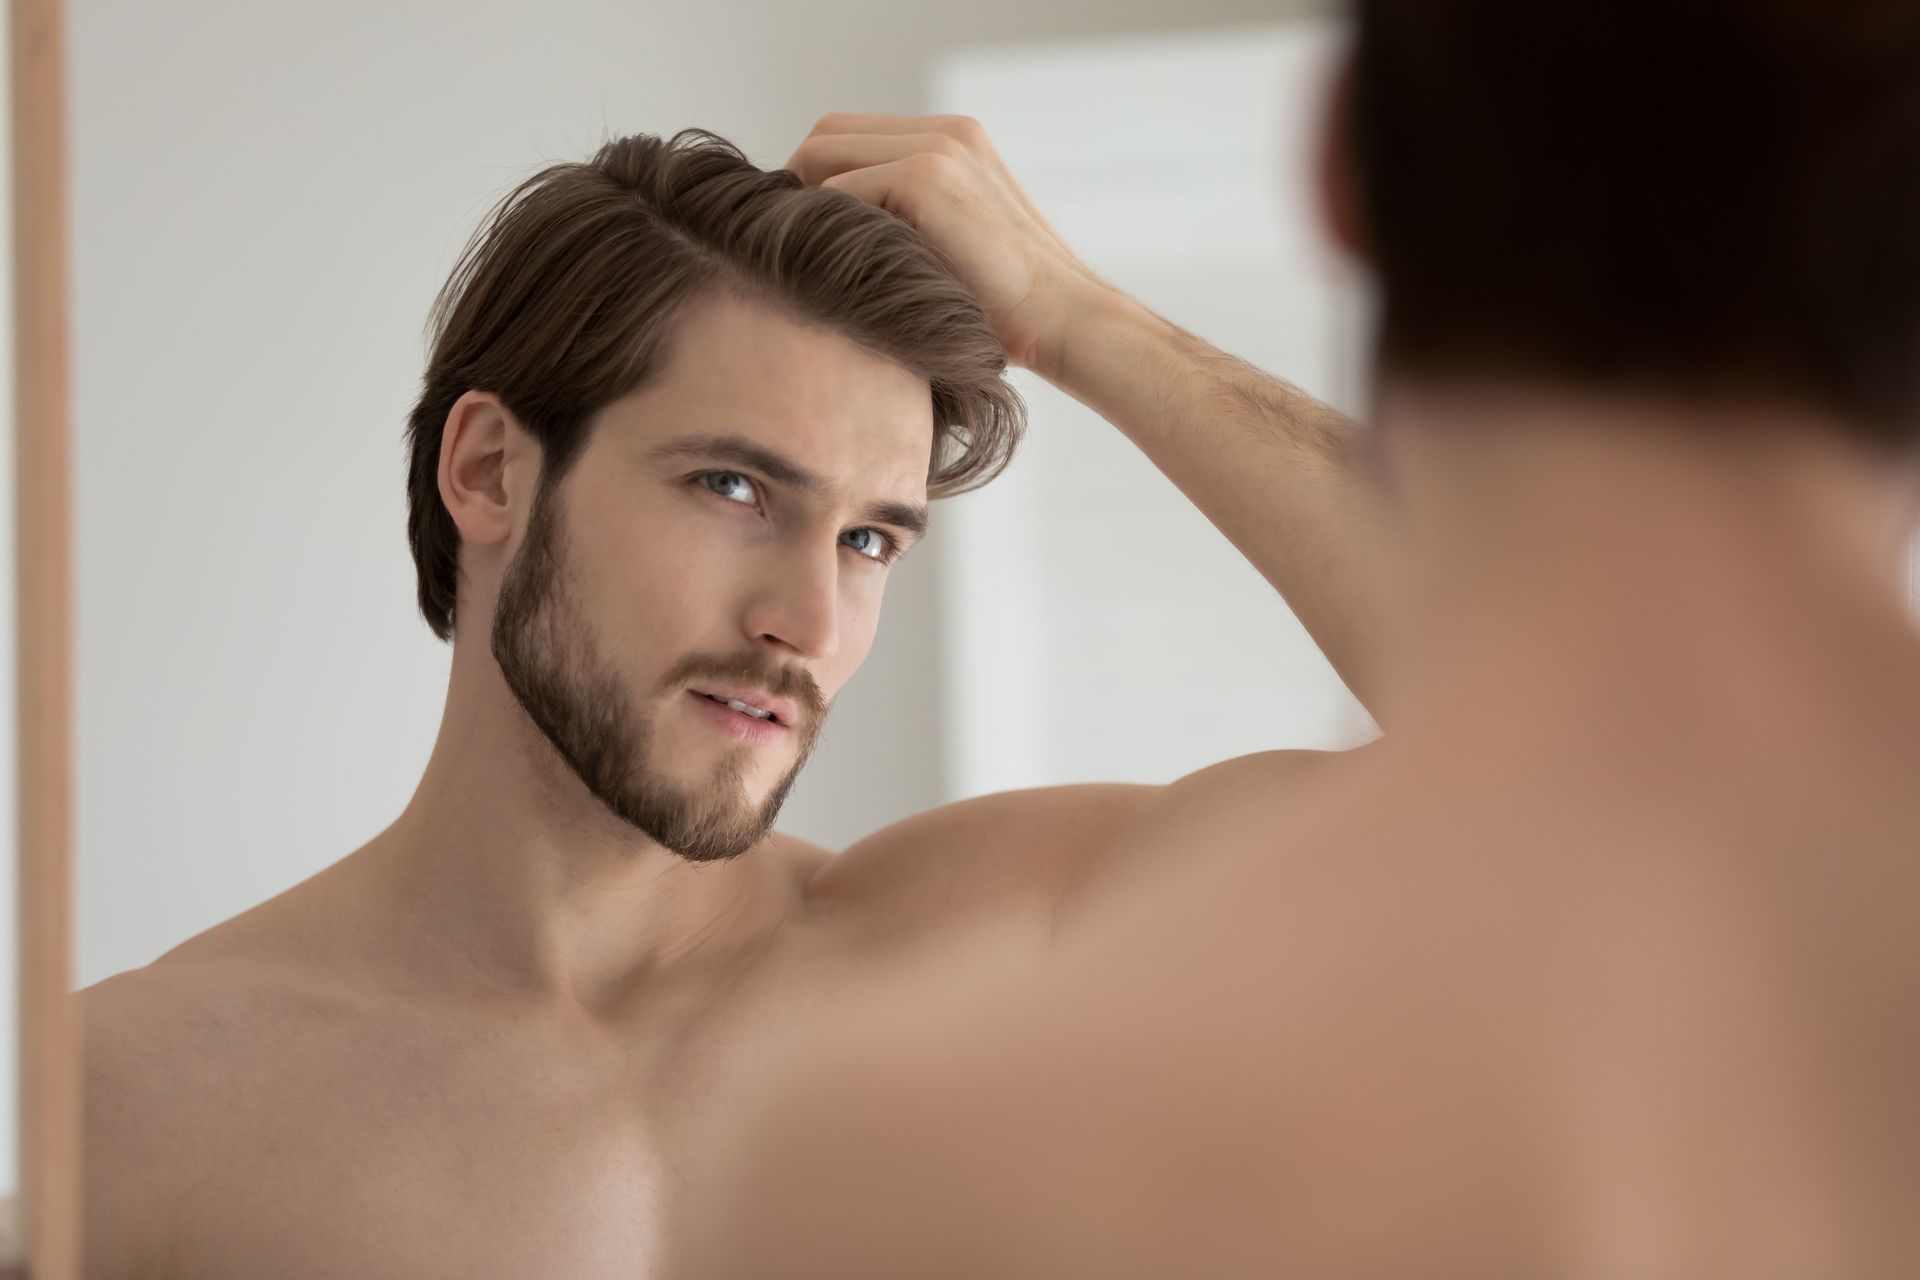 A shirtless man with a beard is looking at his hair in the mirror.